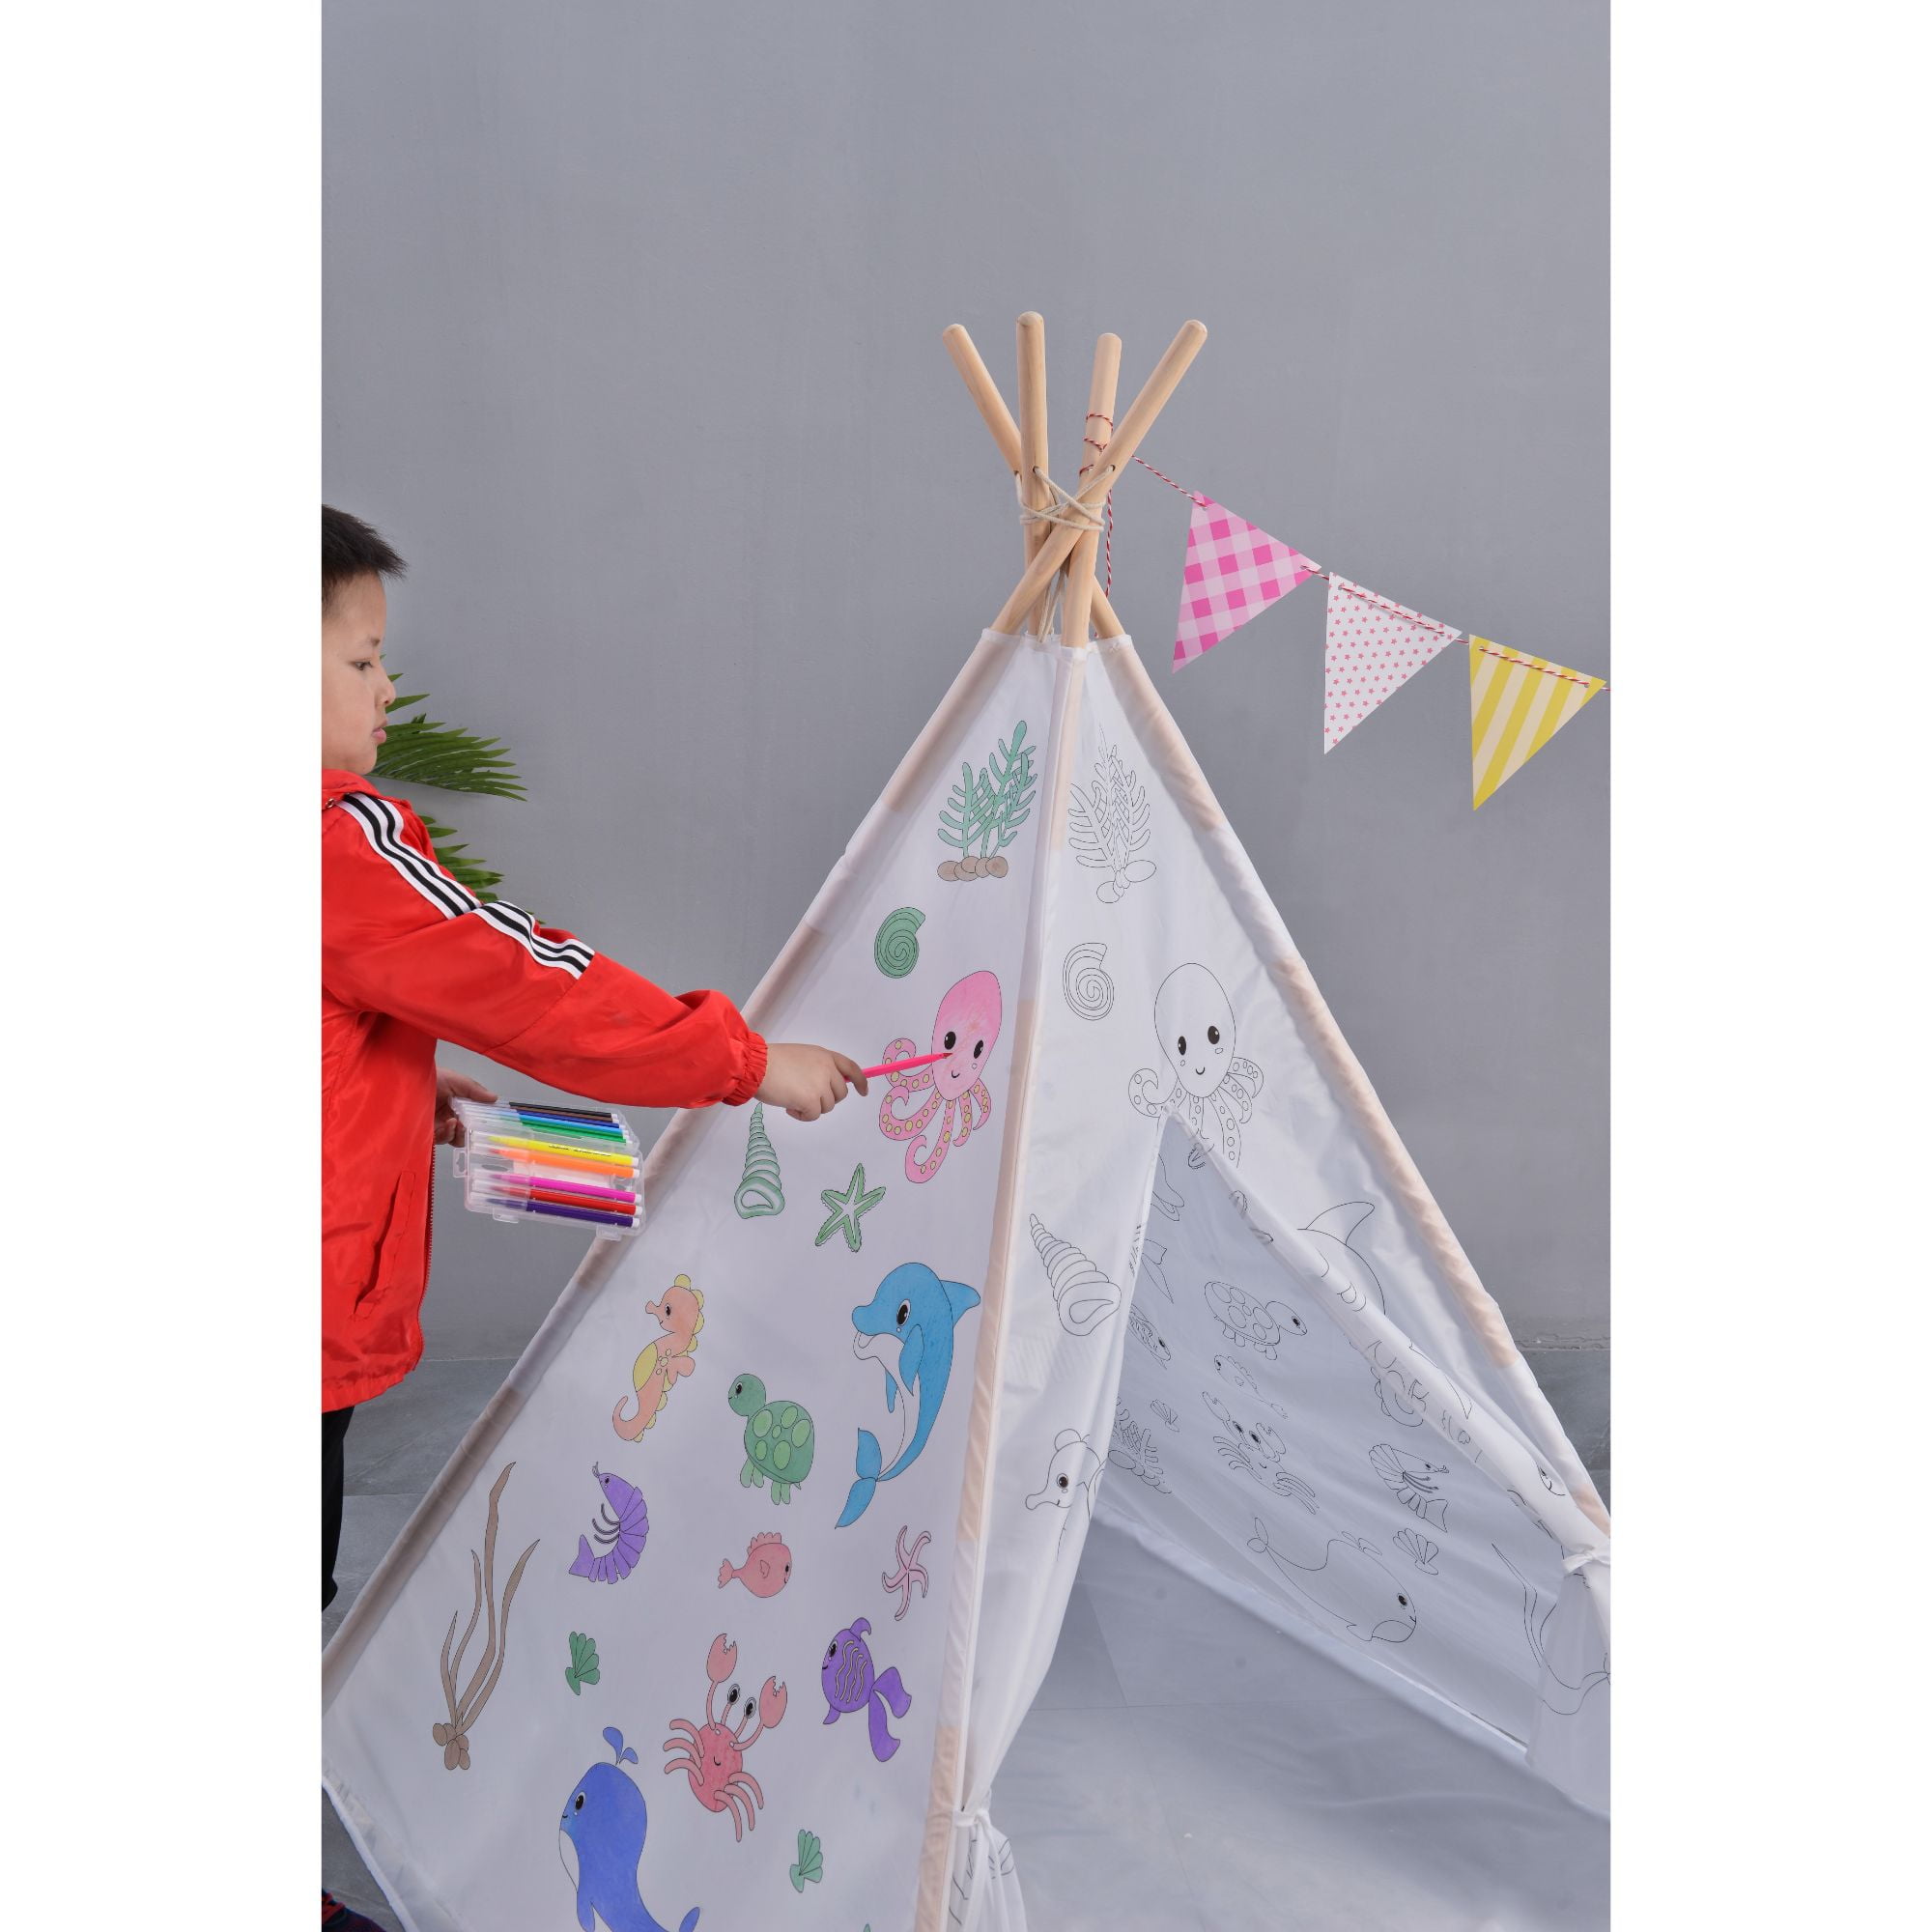 Teepee Play Avrsol Kids Teepee Tent for Girls with Rose Vine Flowers 